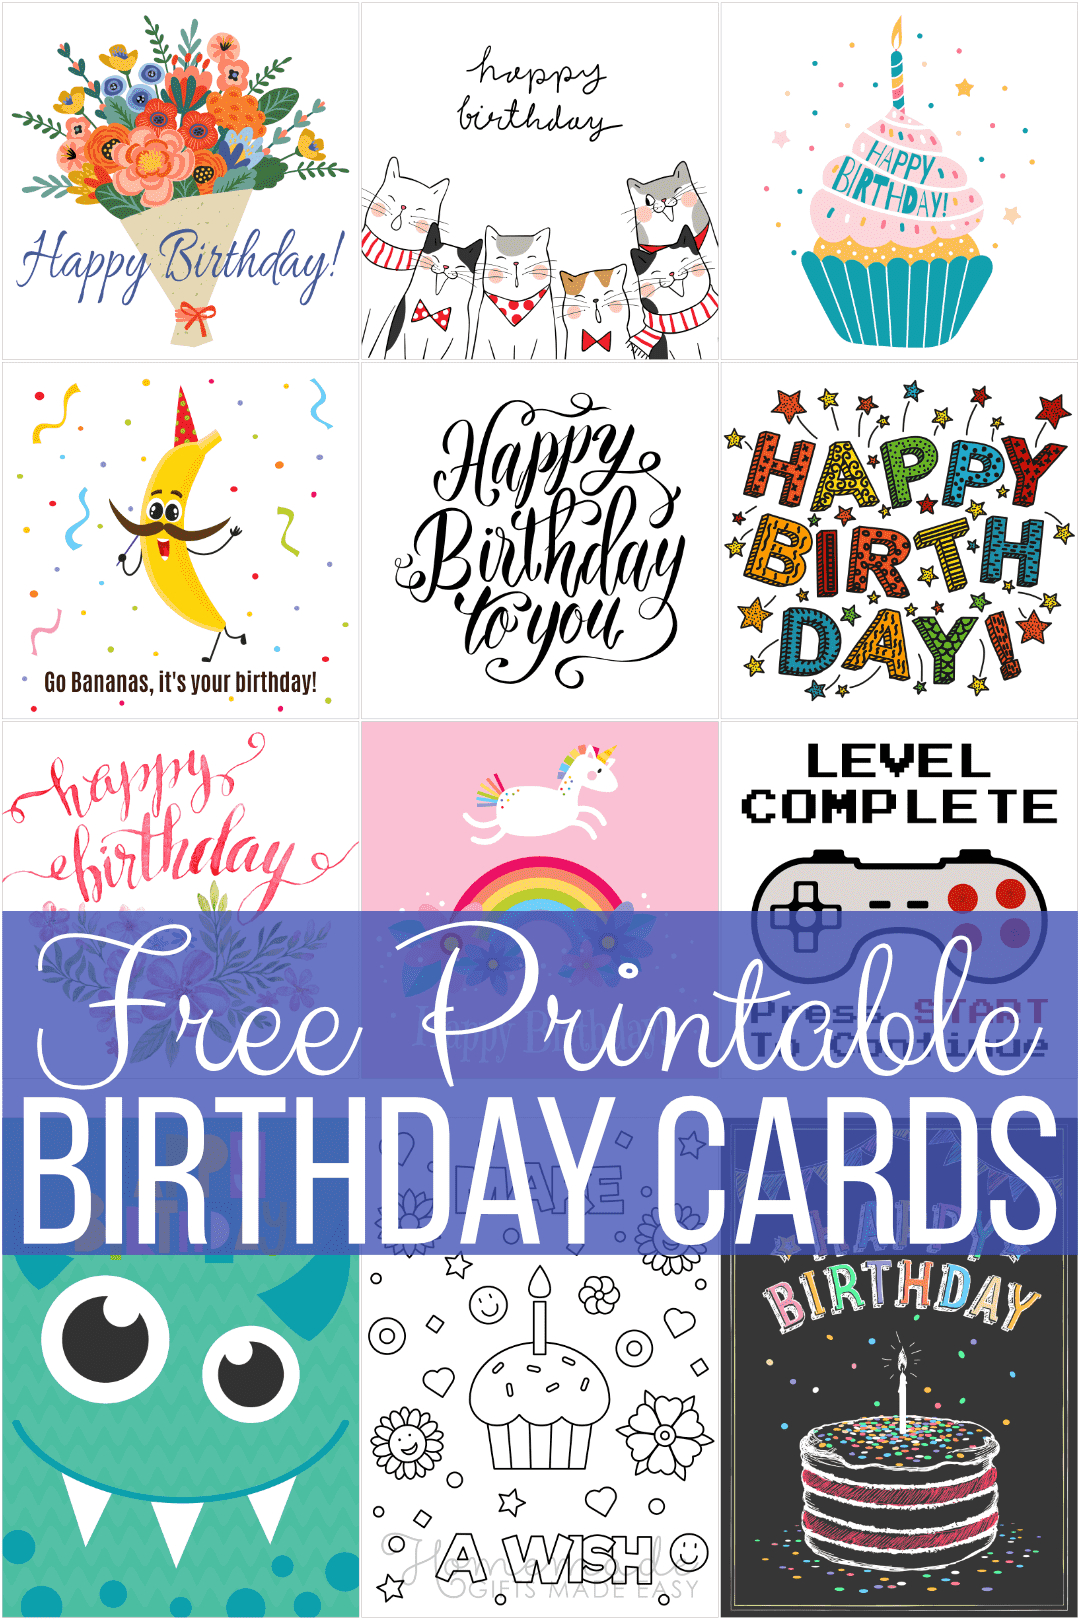 Free Printable Birthday Cards For Everyone inside Free Online Printable Birthday Cards